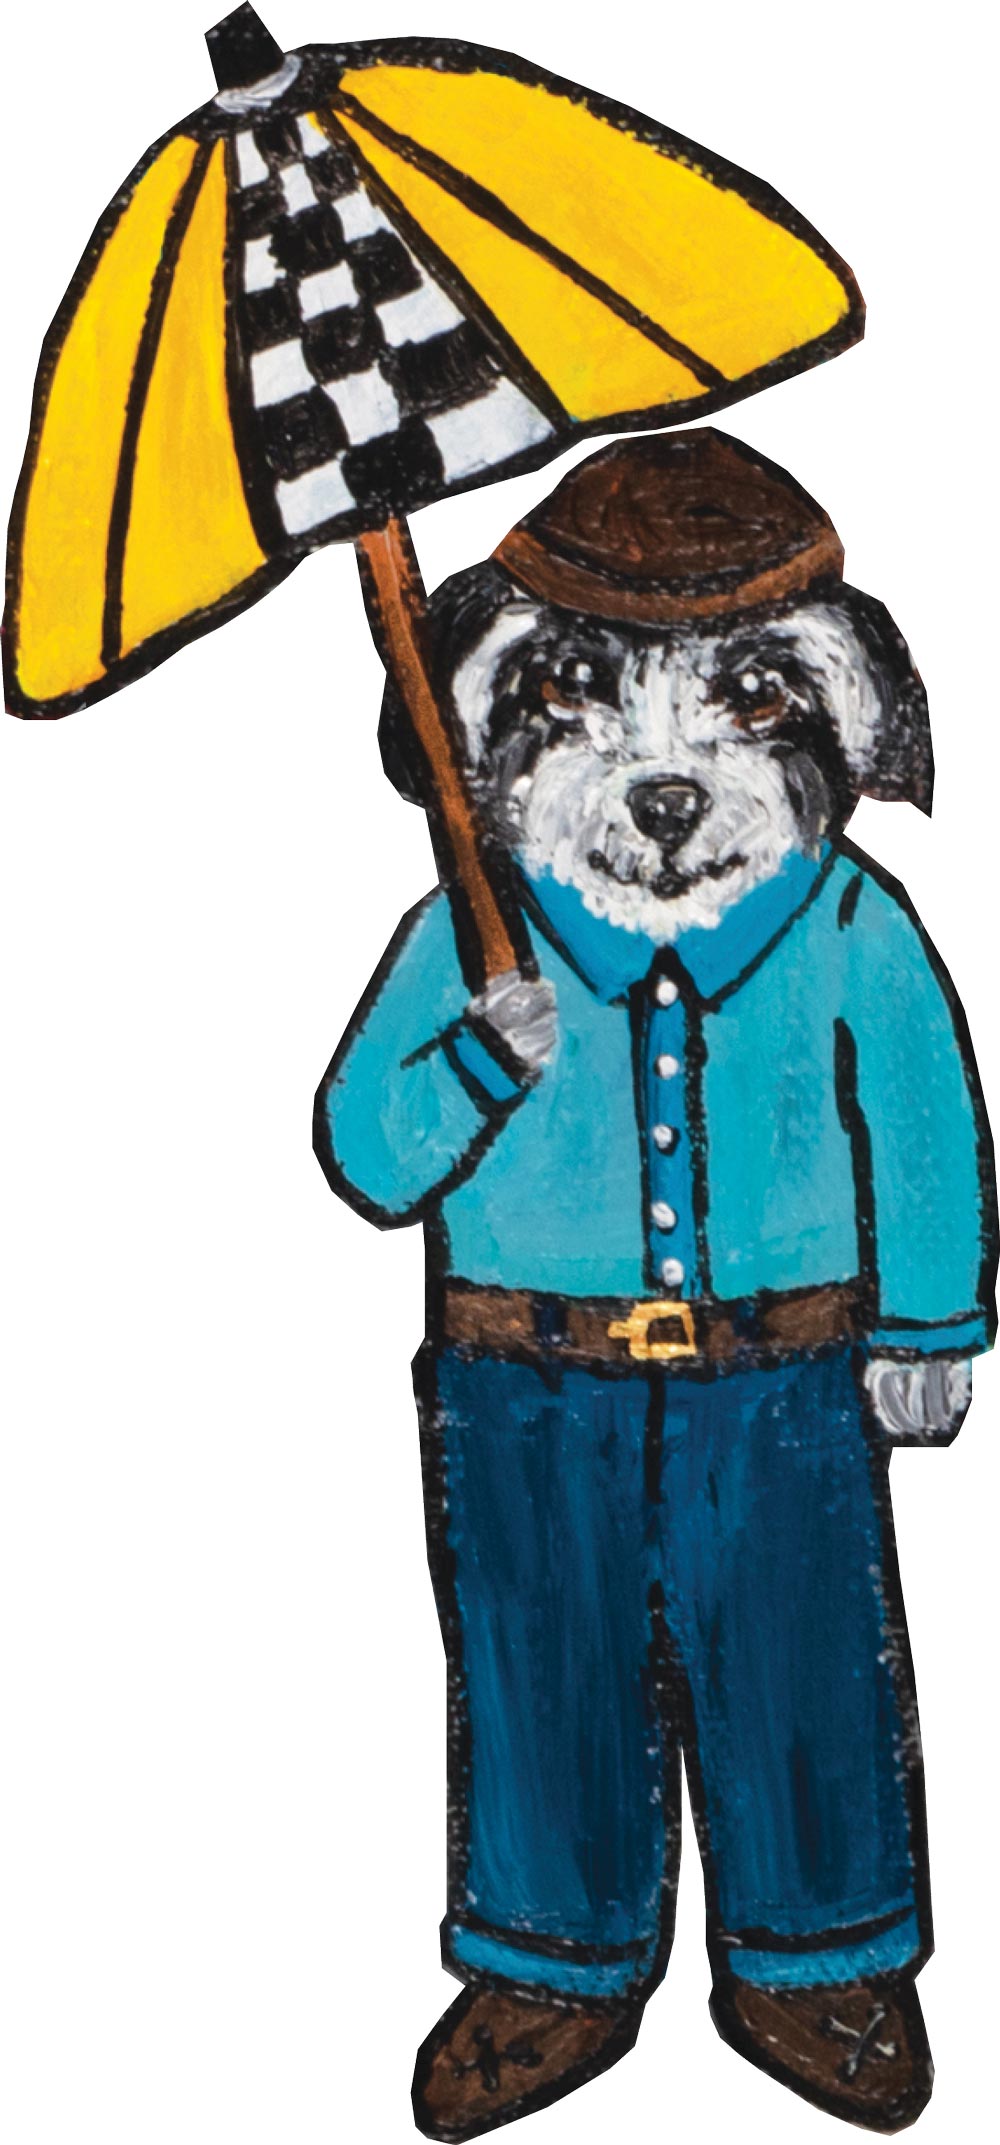 illustration of a dog wearing a shirt and pants and holding an umbrella